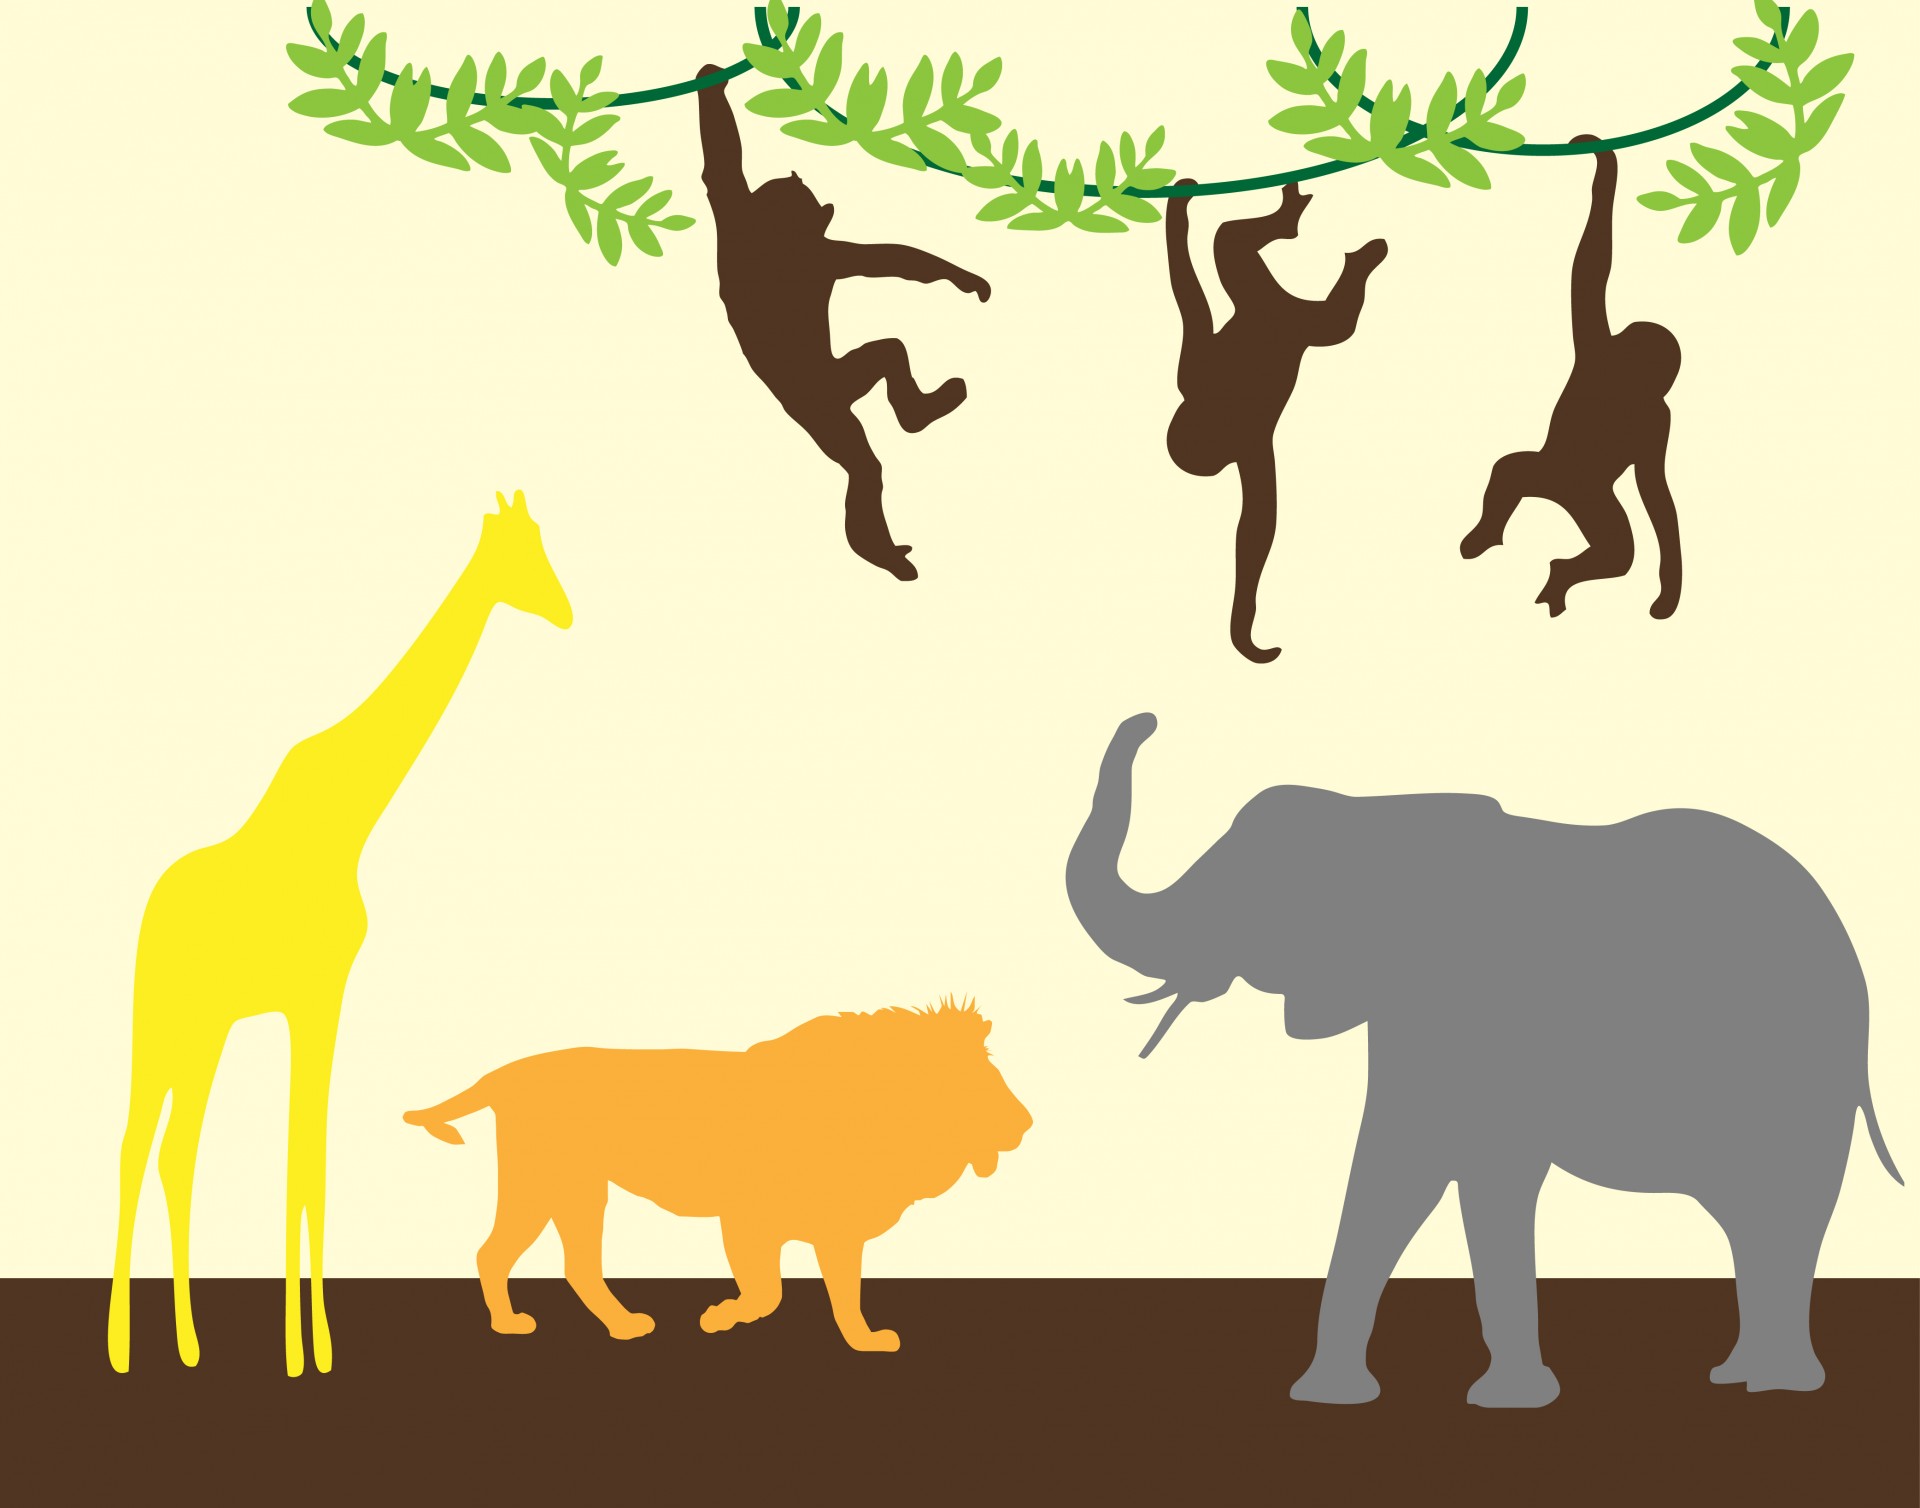 Cute colorful silhouettes of jungle animals, monkey, giraffe, lion and elephant